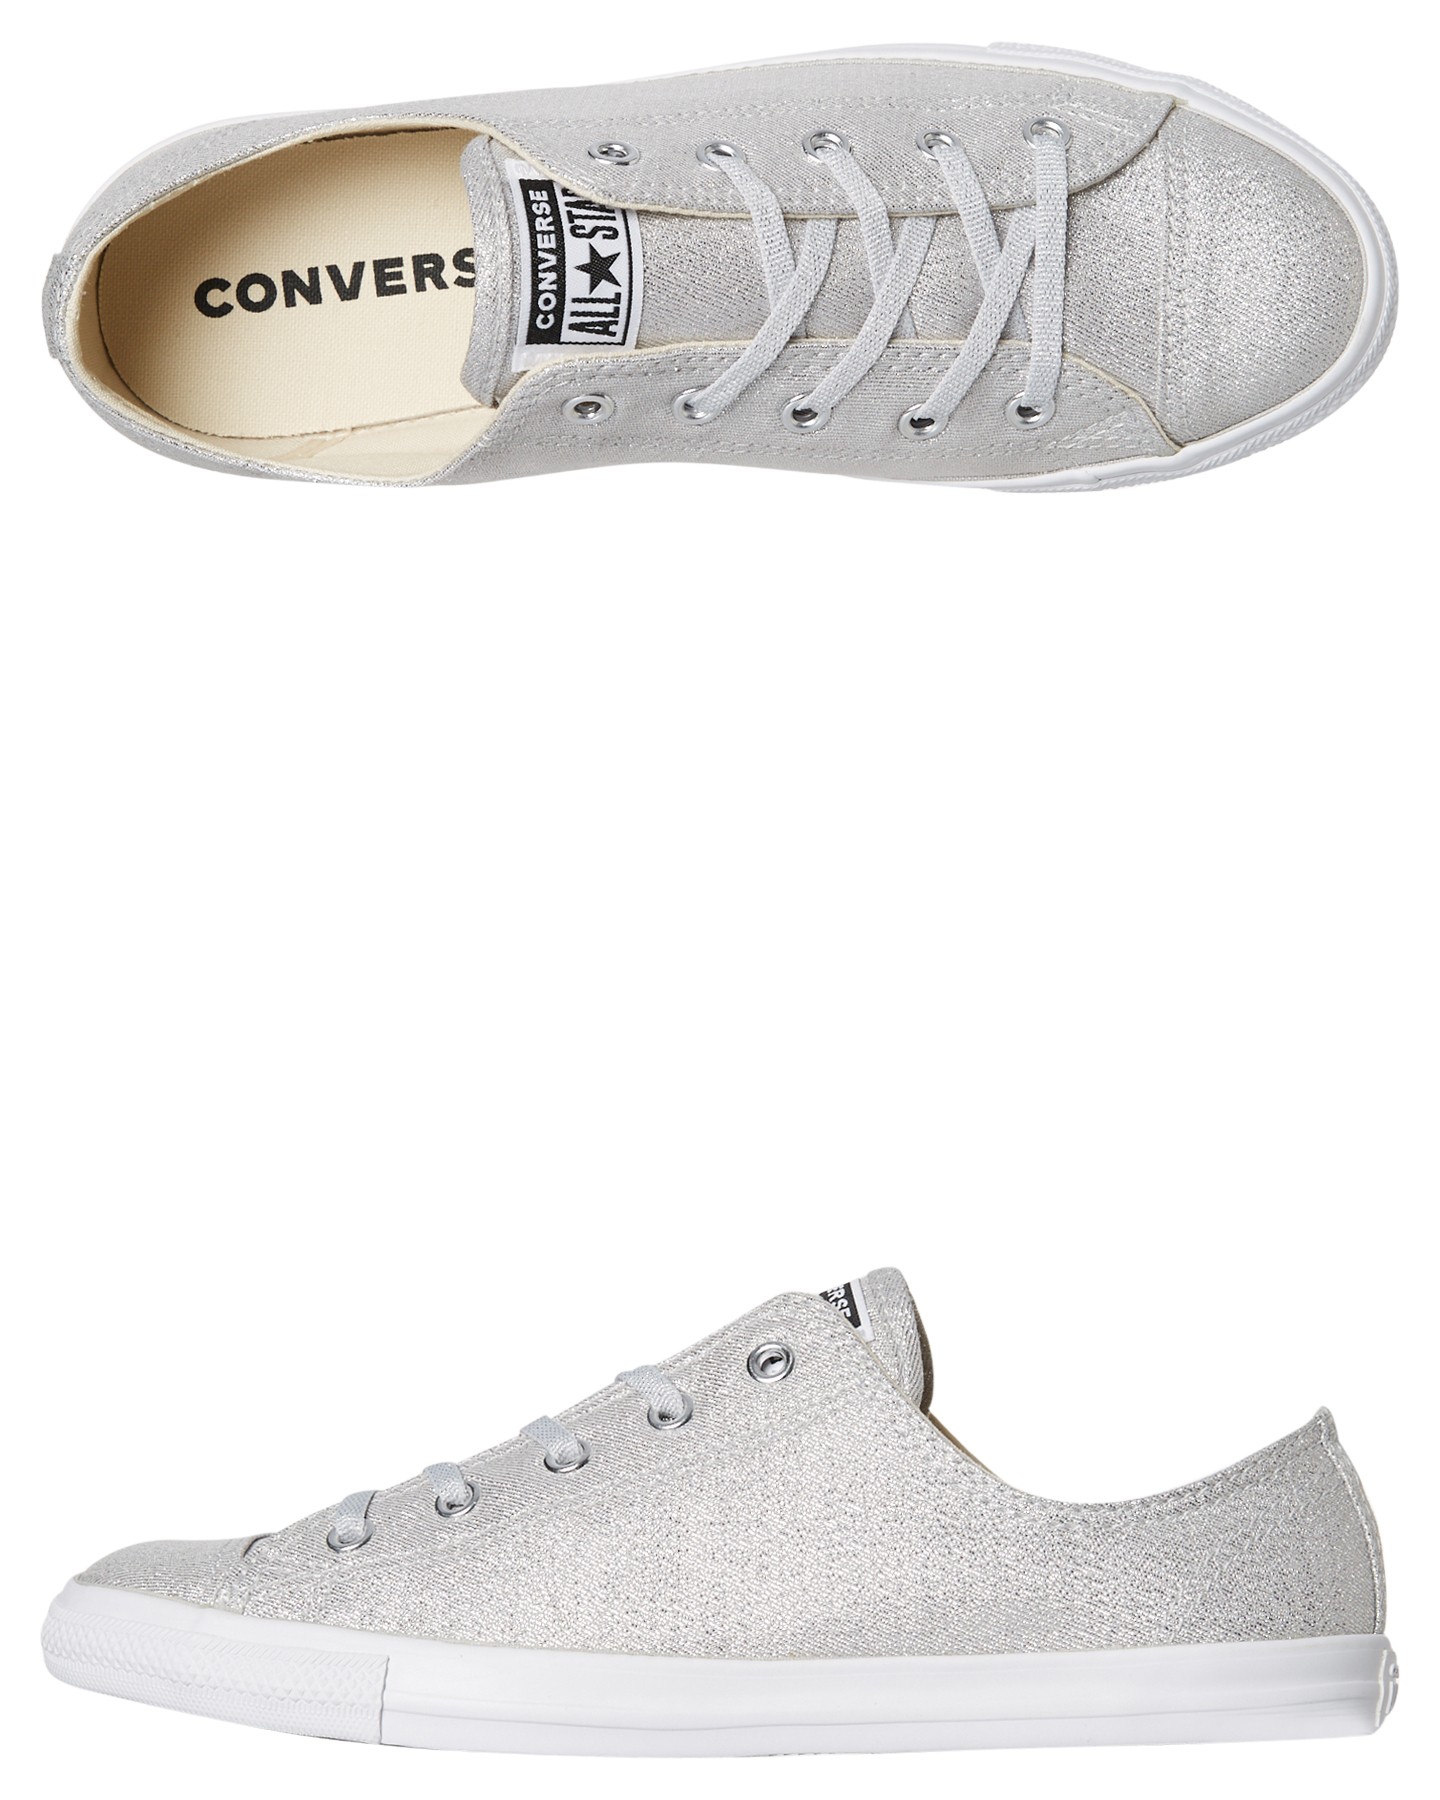 converse dainty shoes